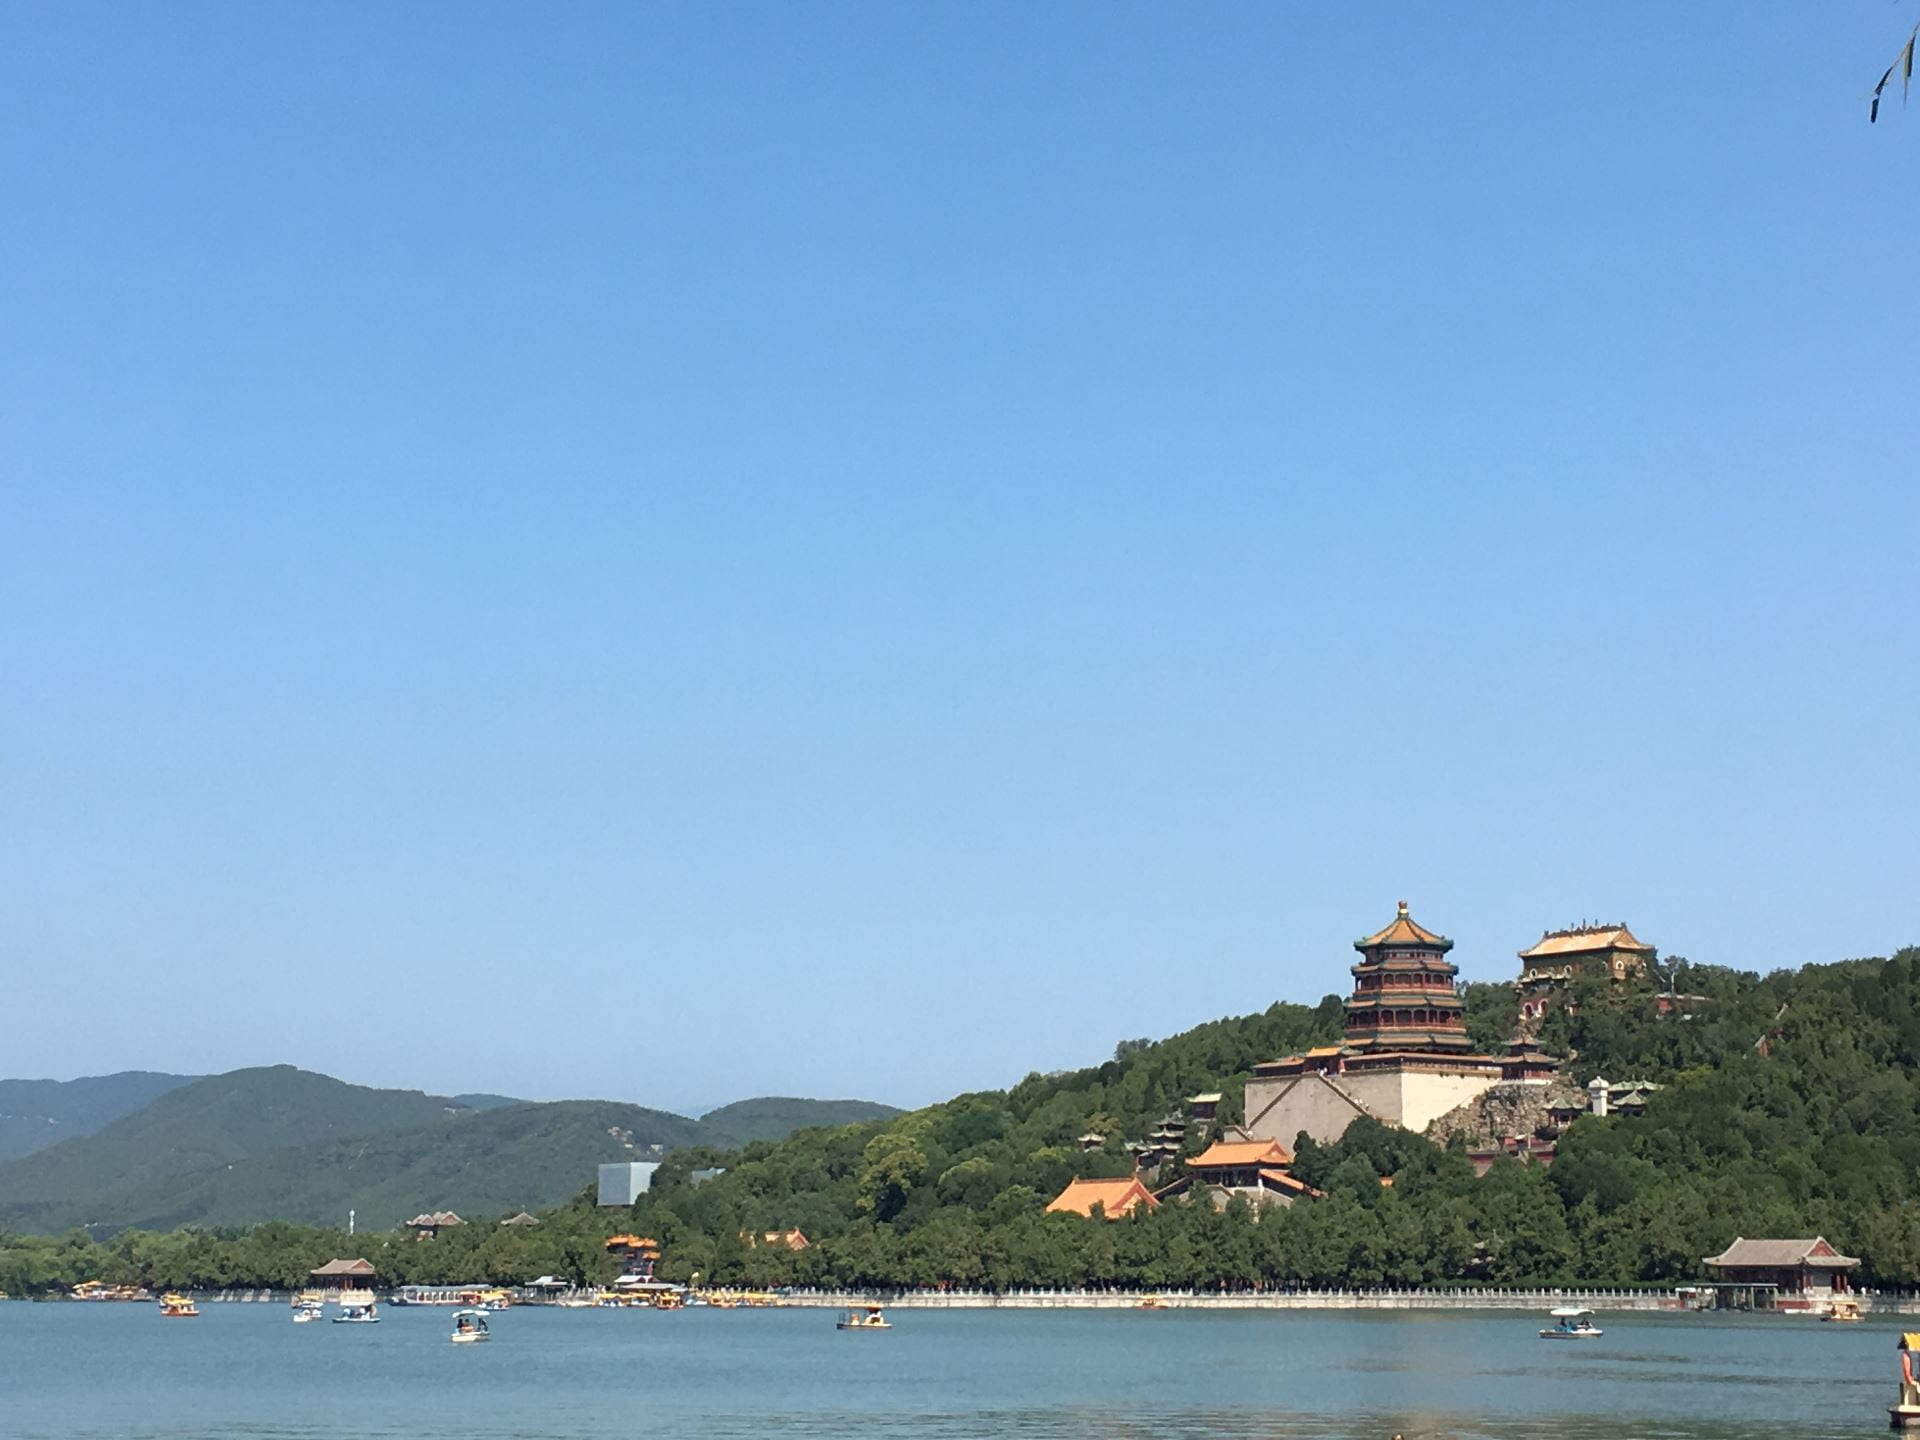 Featured Photo: Summer Palace, Beijing